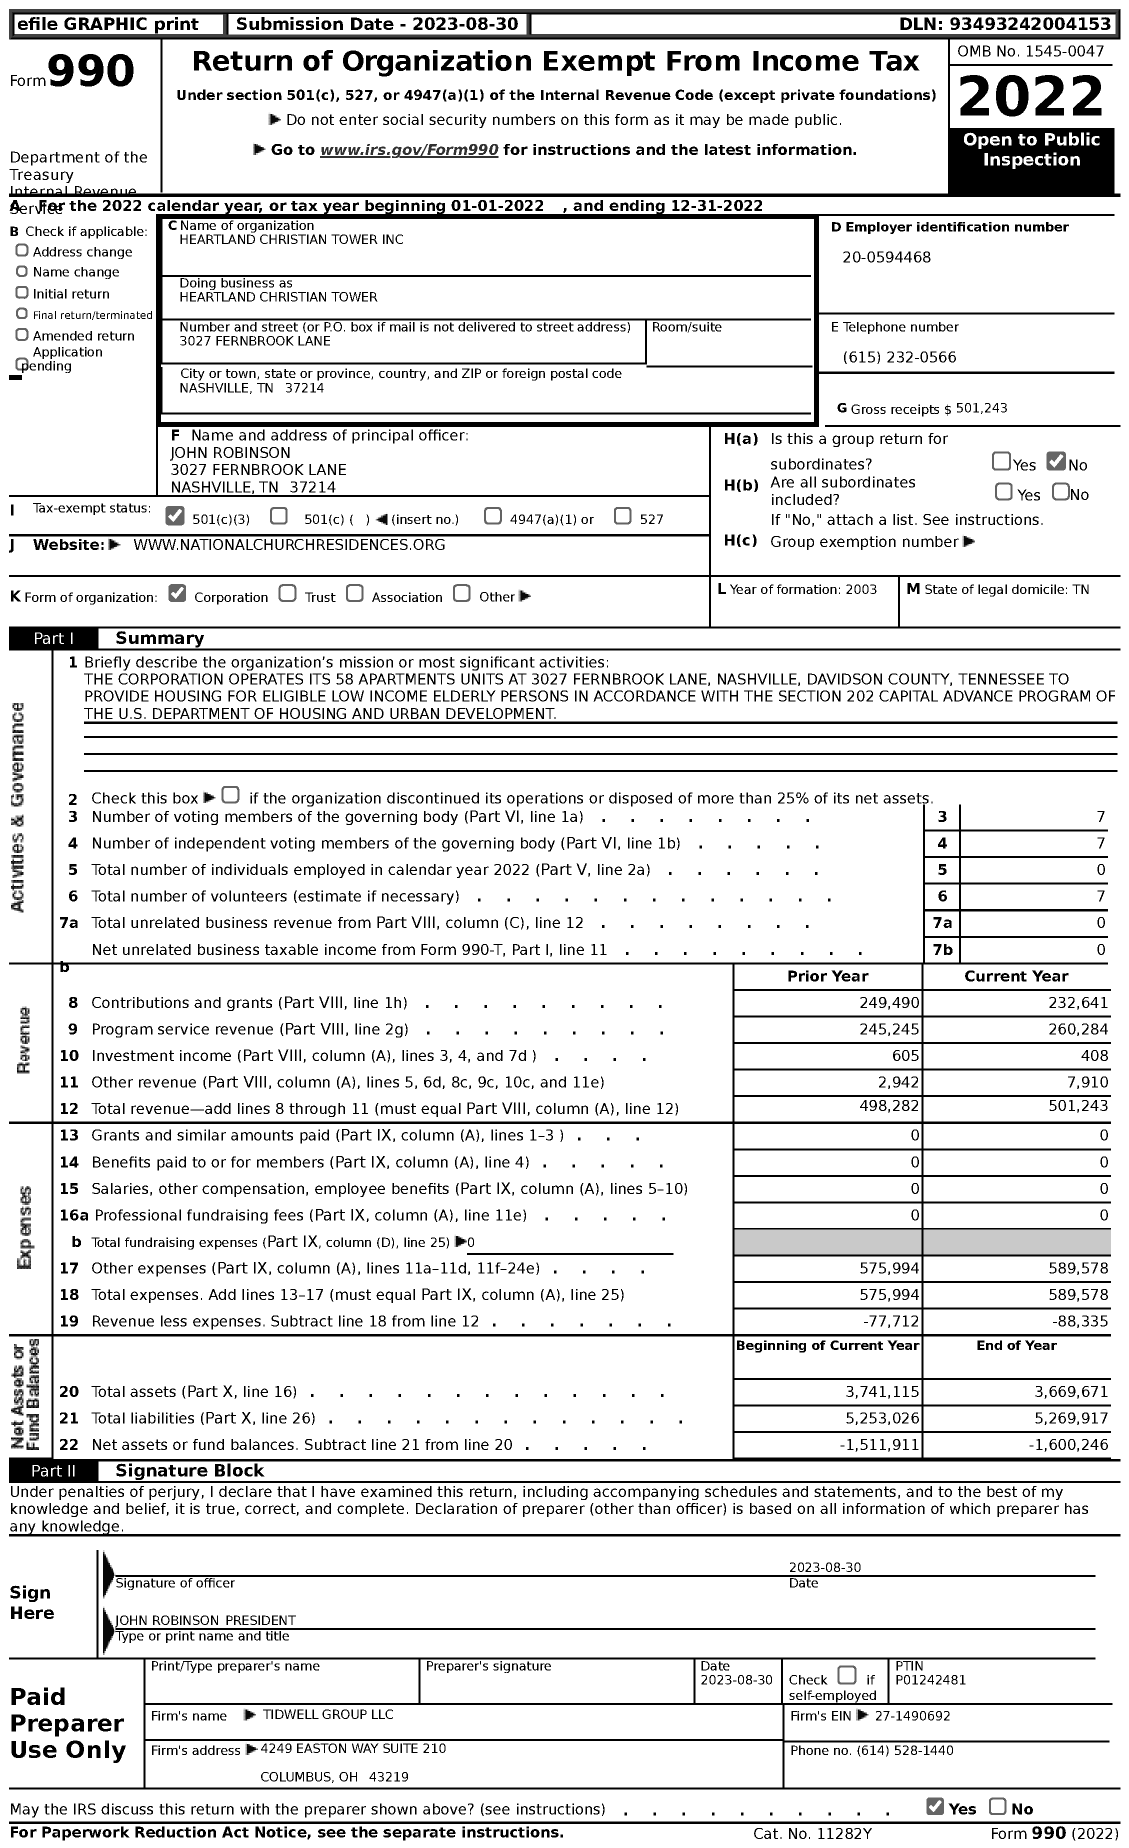 Image of first page of 2022 Form 990 for Heartland Christian Tower